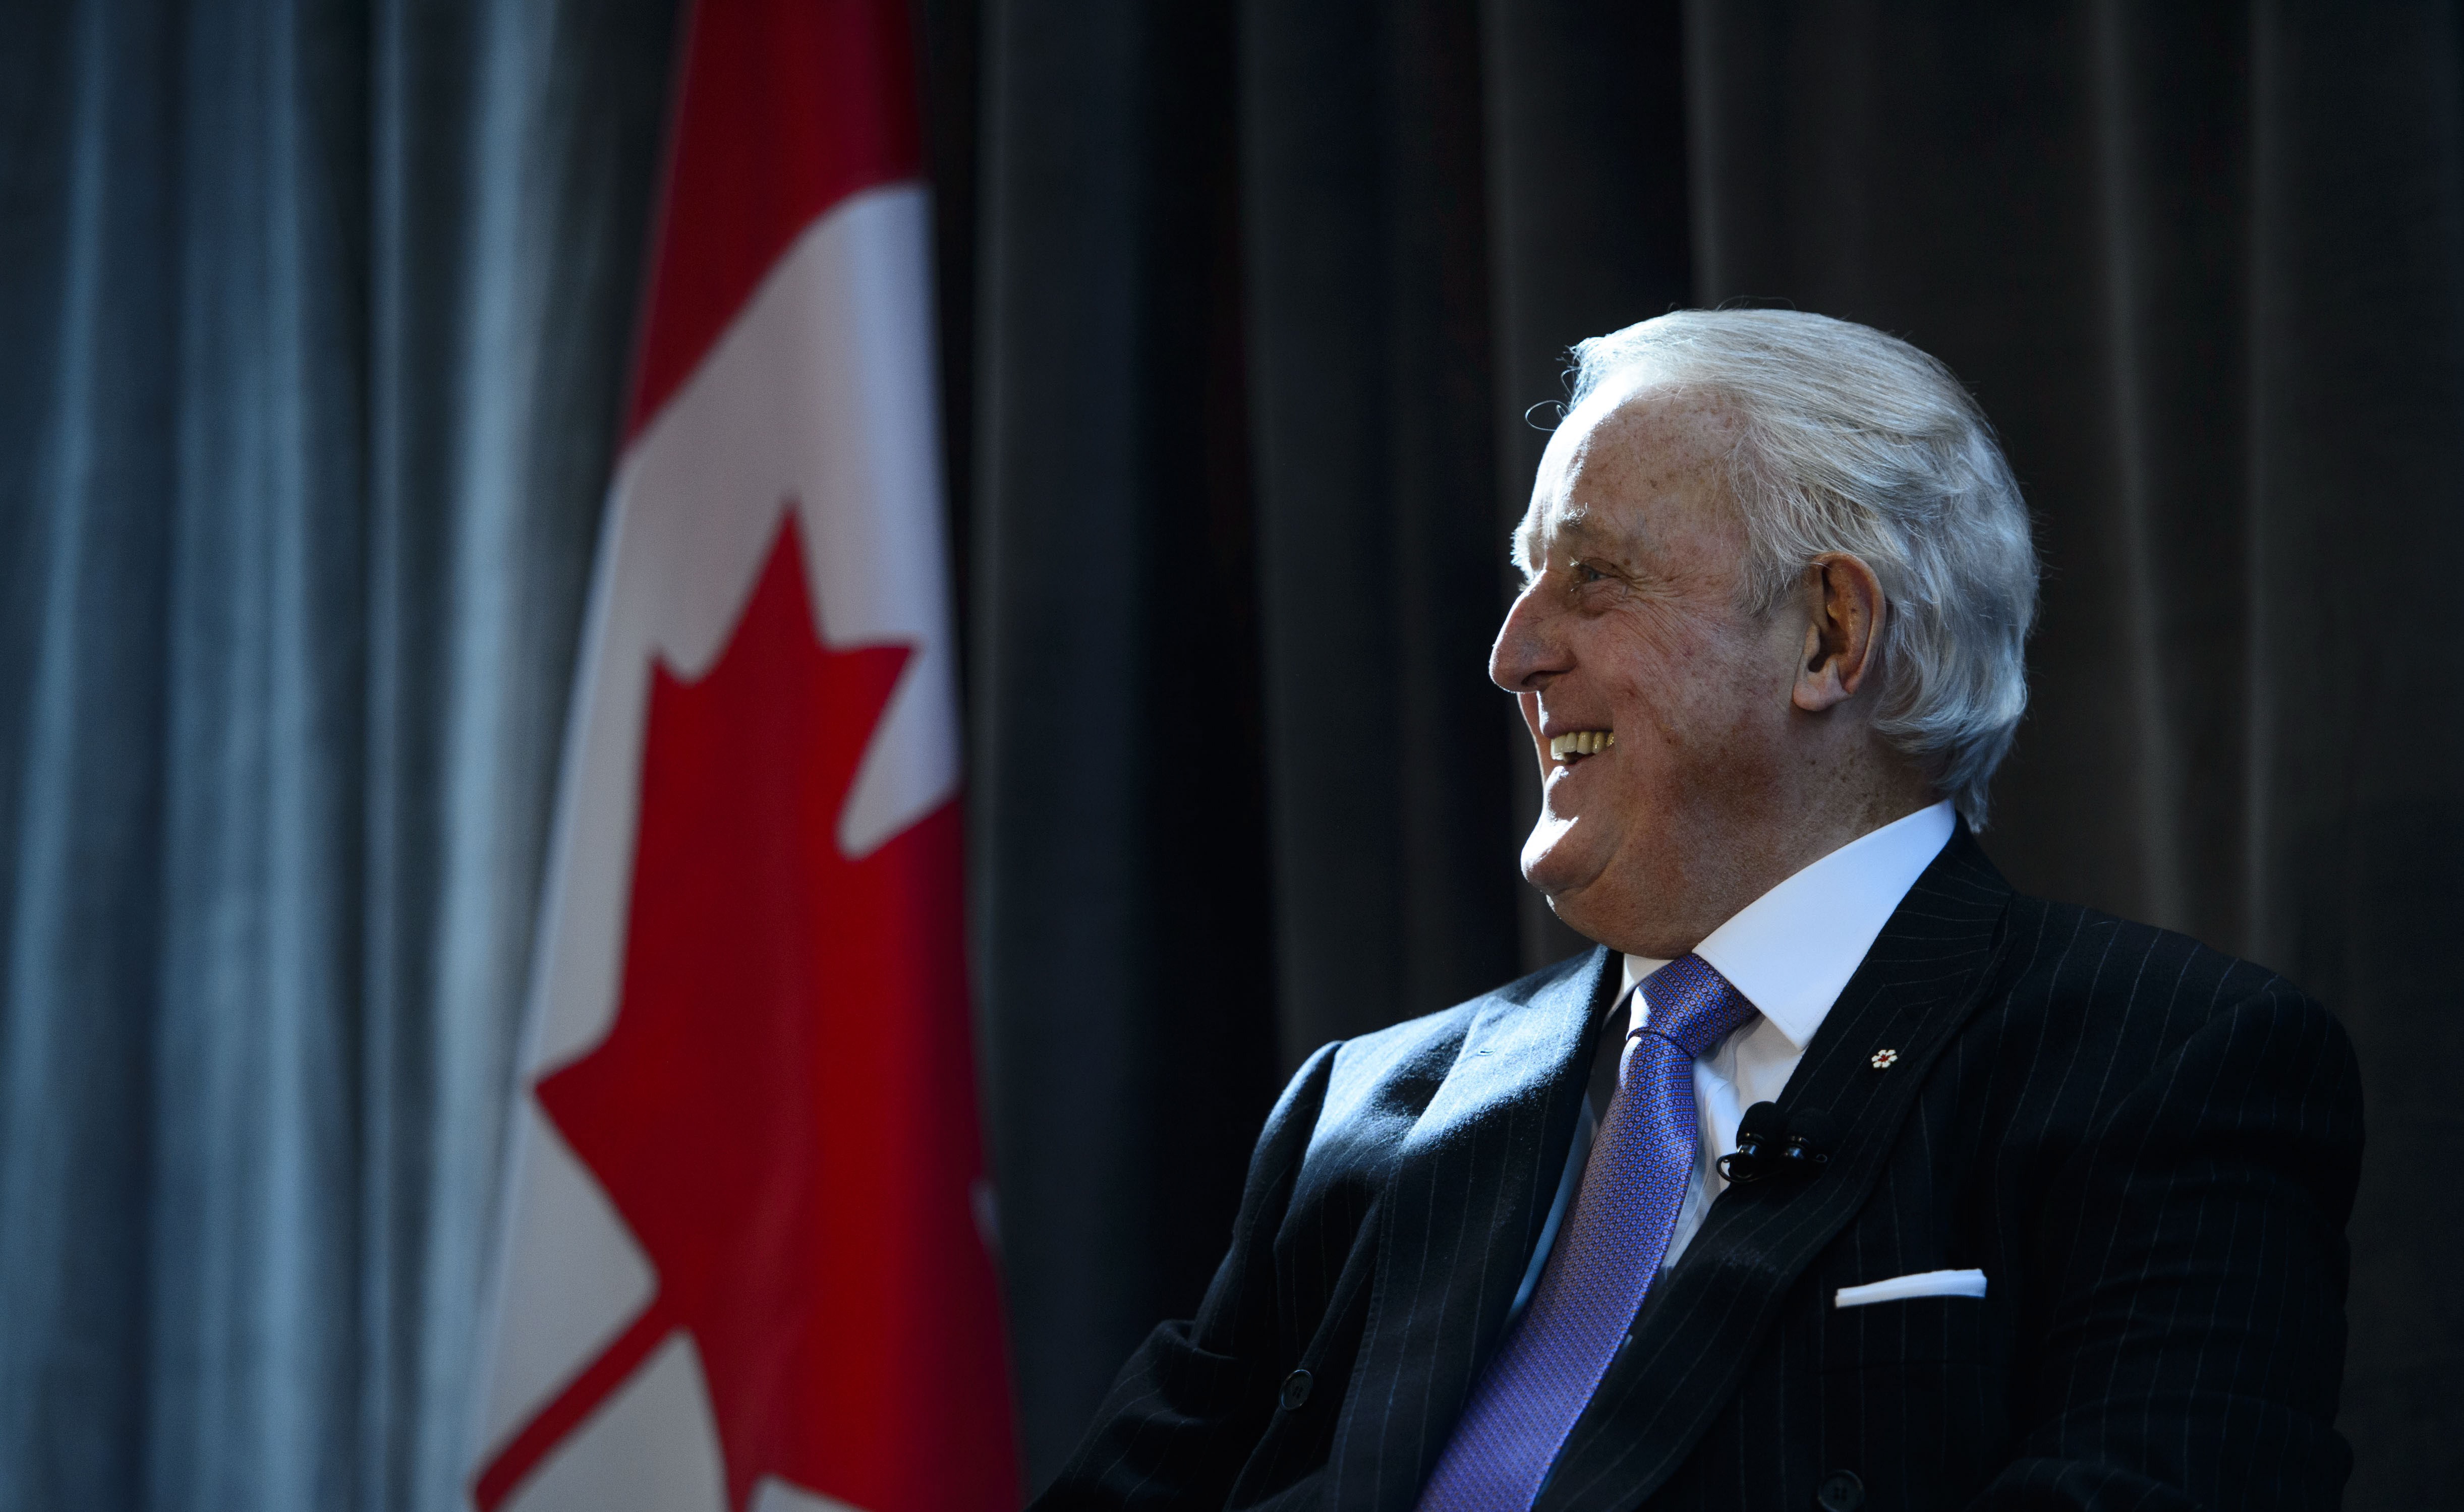 What to expect as Brian Mulroney’s state funeral set to begin